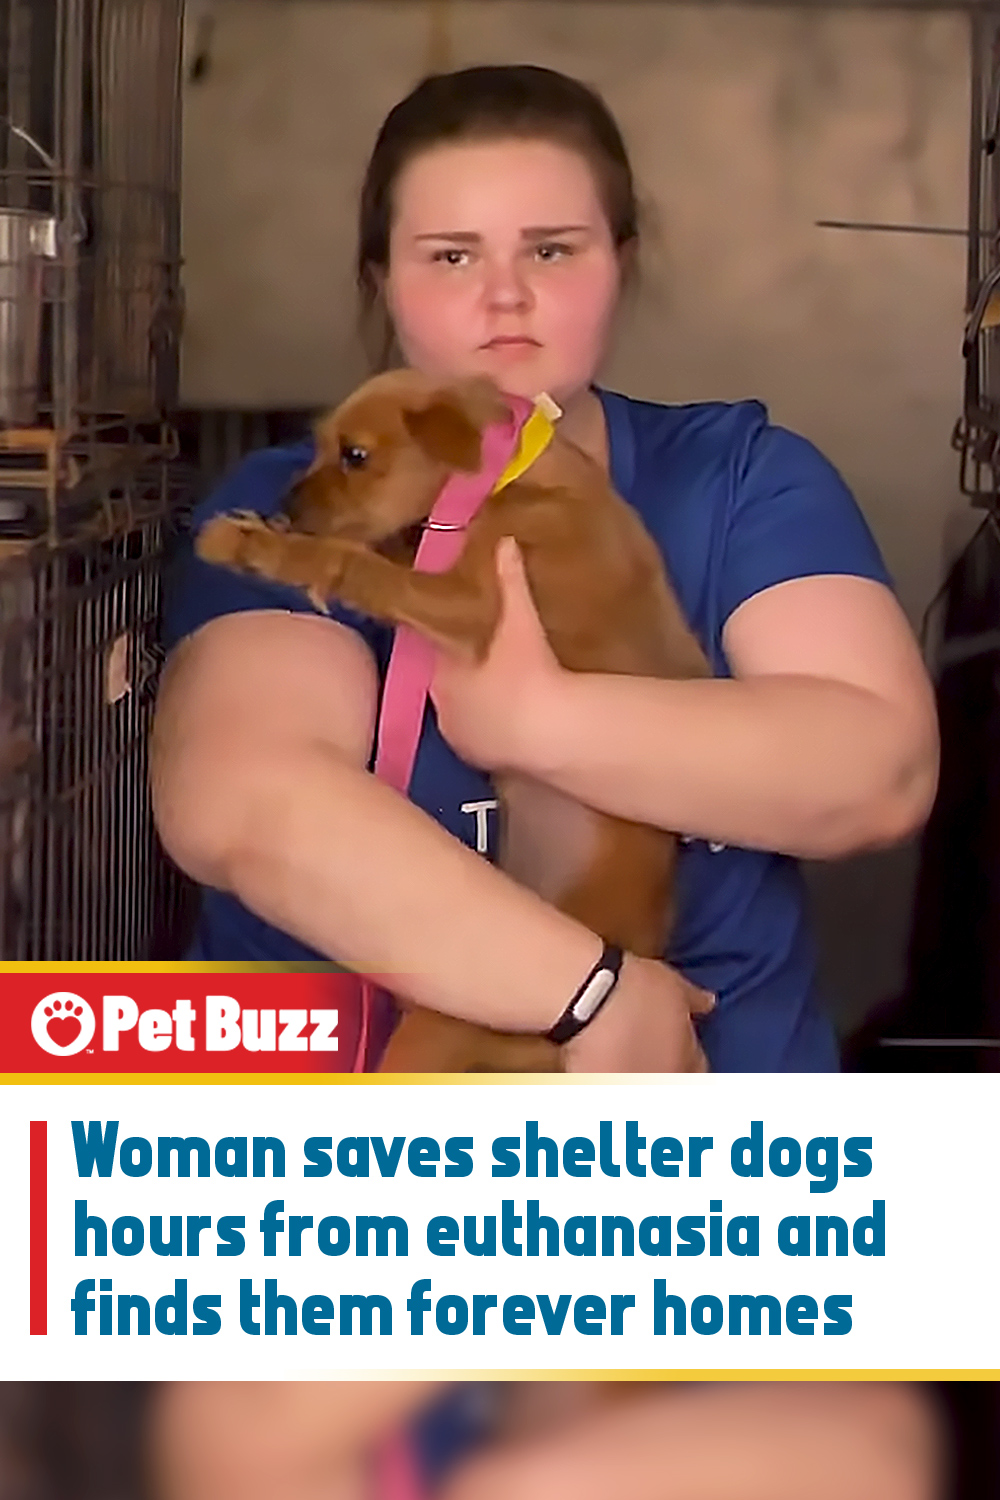 Woman saves shelter dogs hours from euthanasia and finds them forever homes